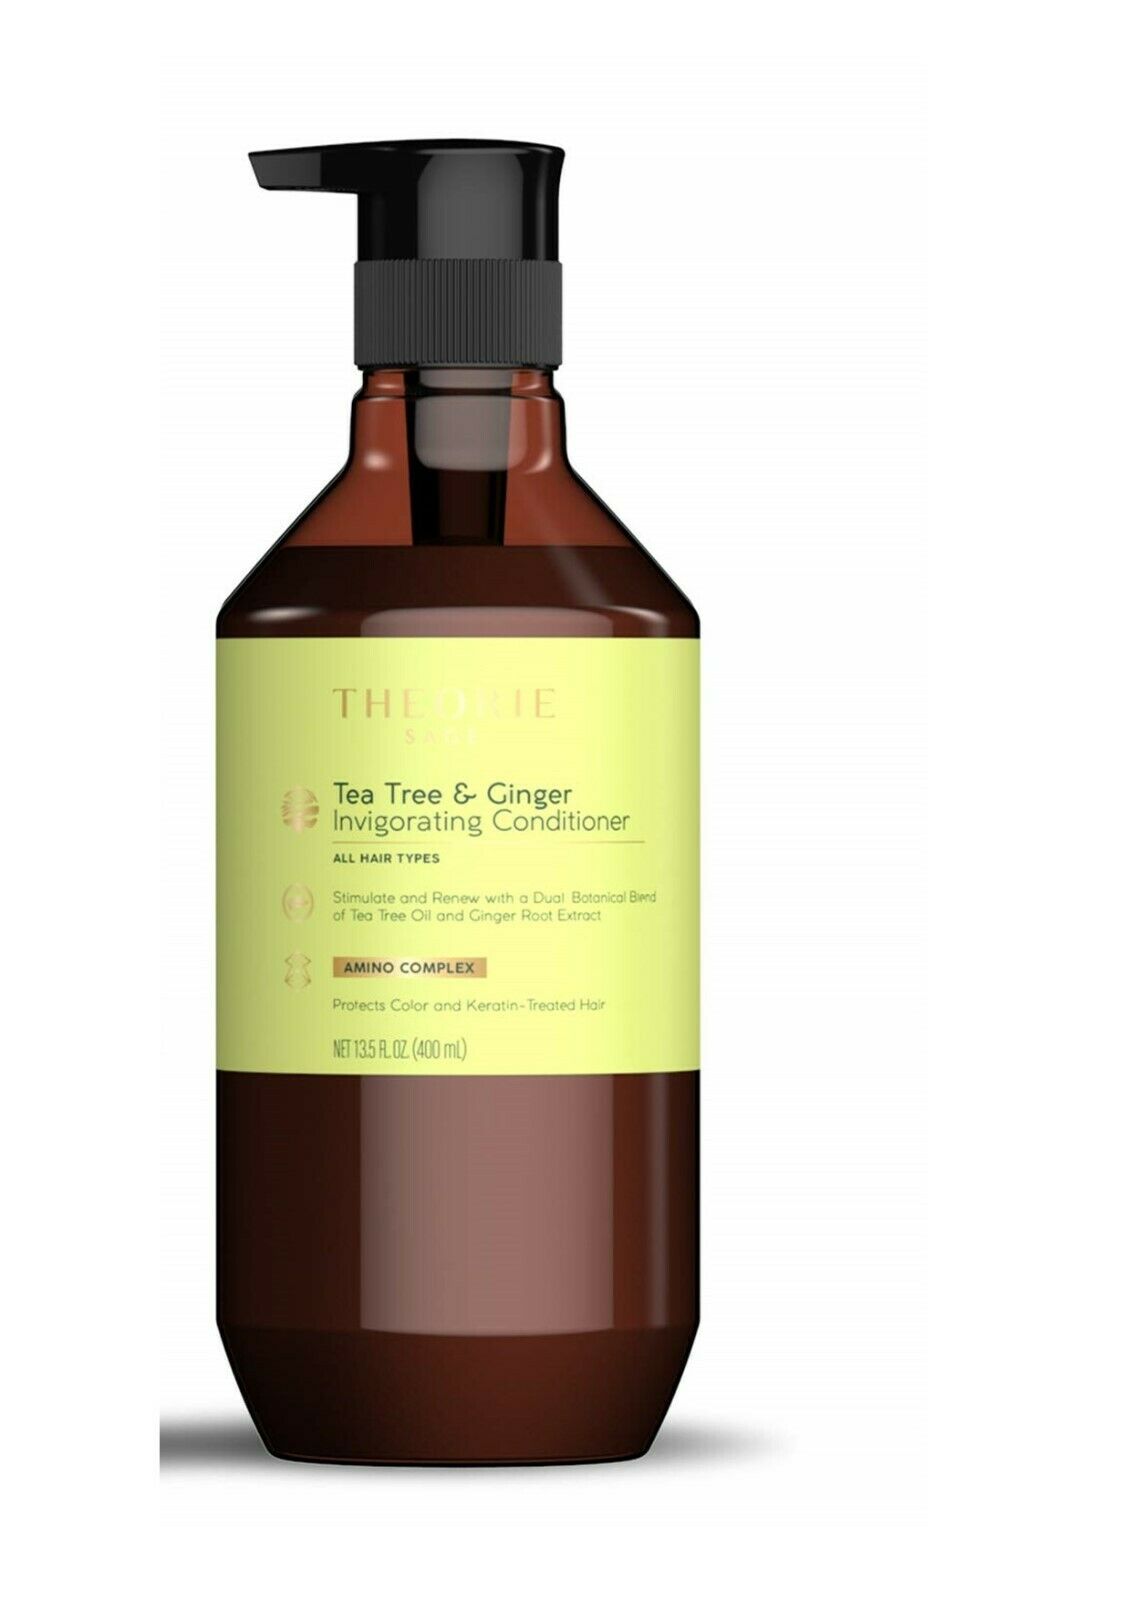 iaahhaircare,Theorie Tea Tree and Ginger Invigorating Conditioner 400mL,Shampoos & Conditioners,Theorie